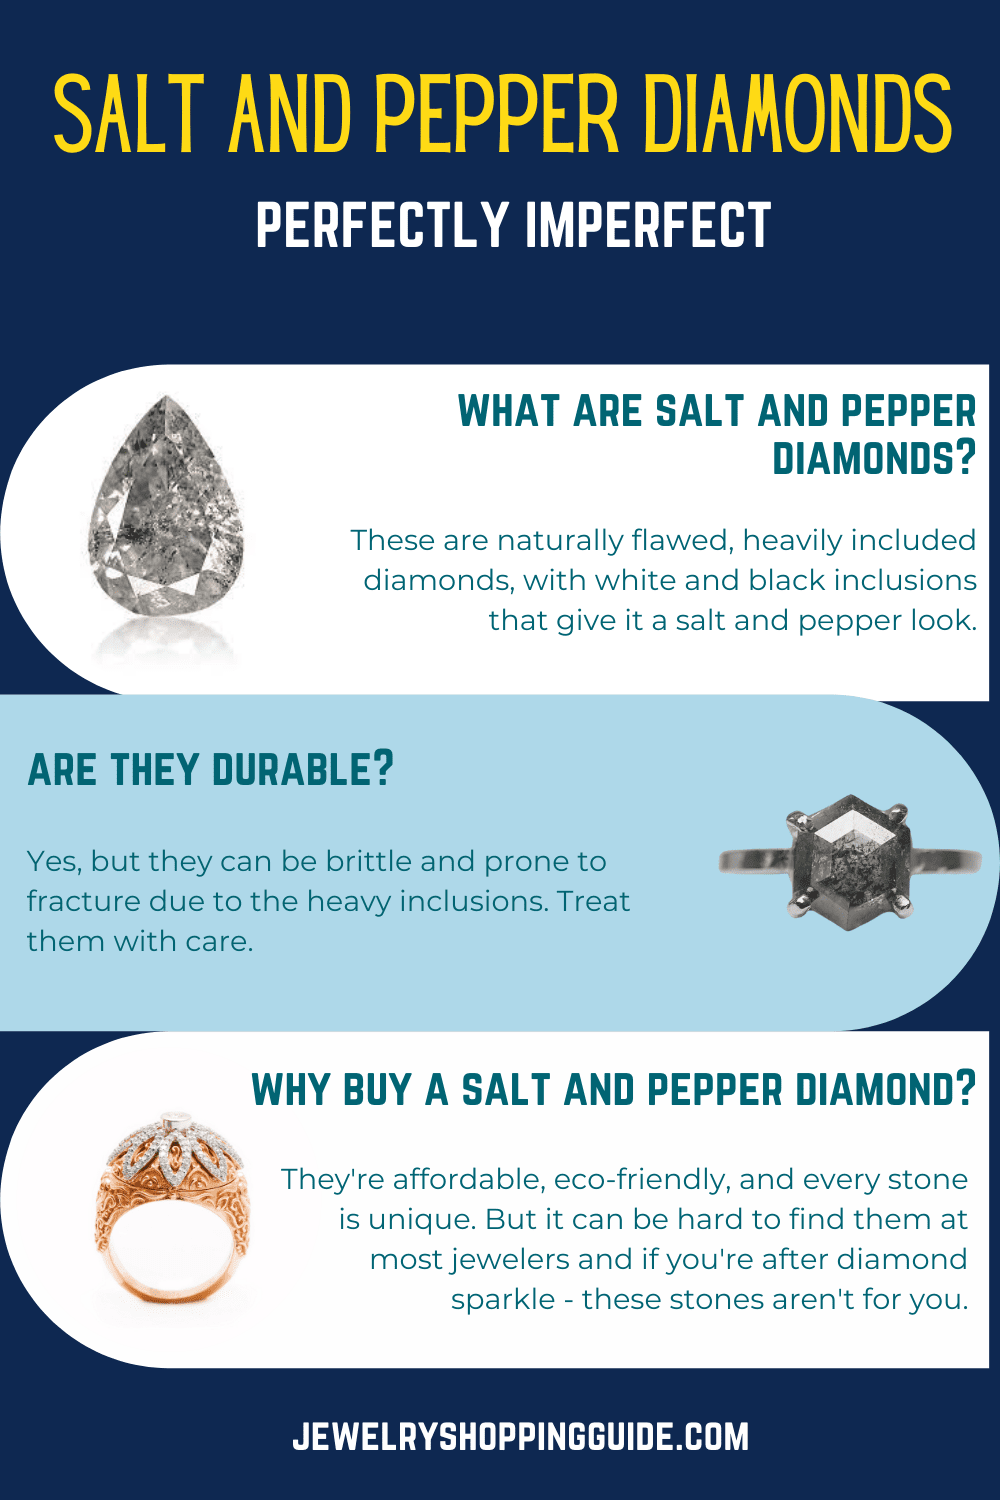 What are salt and pepper diamonds